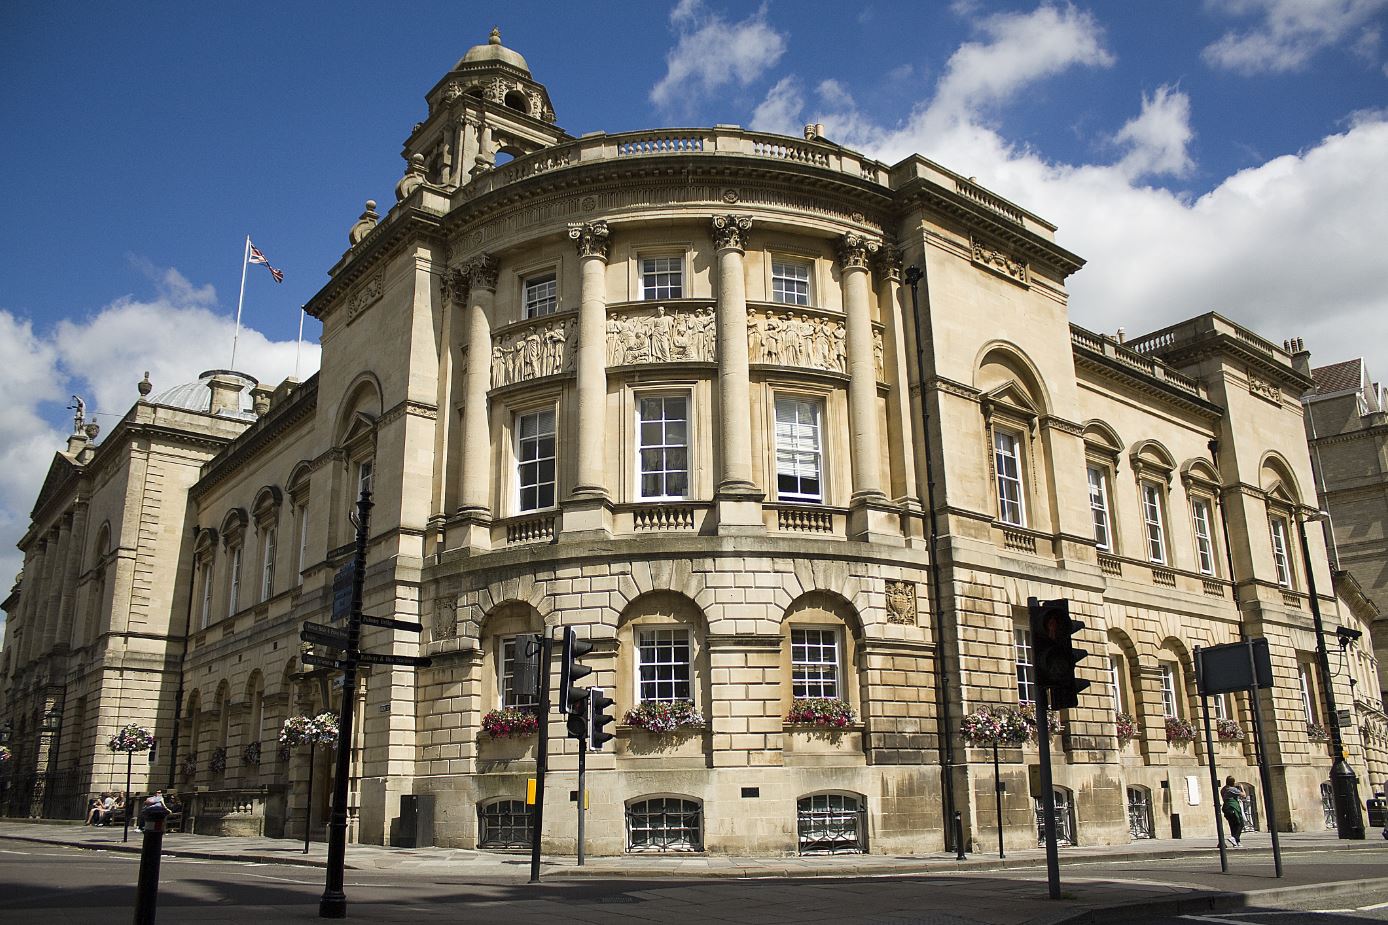 Guildhall in Bath